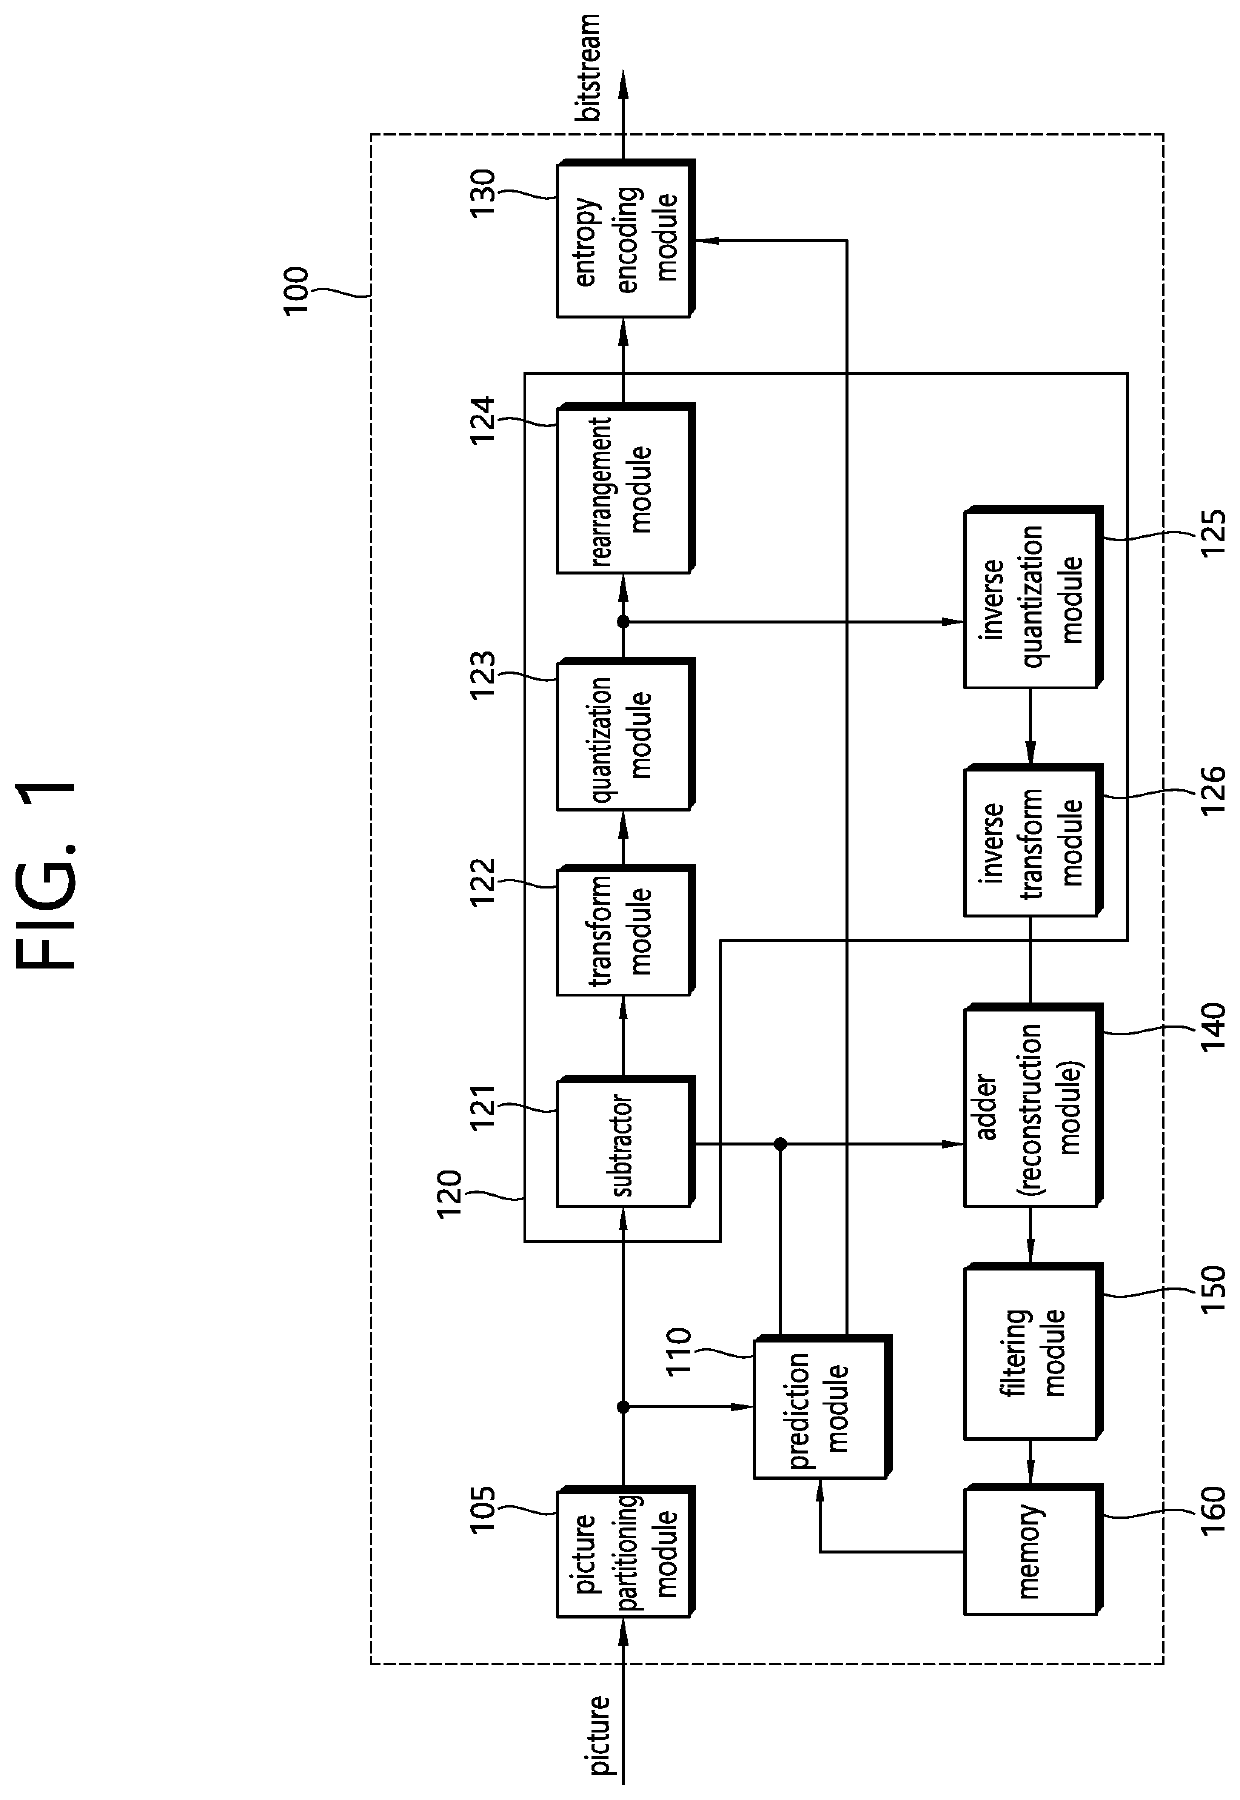 Image coding apparatus and method thereof based on a quantization parameter derivation